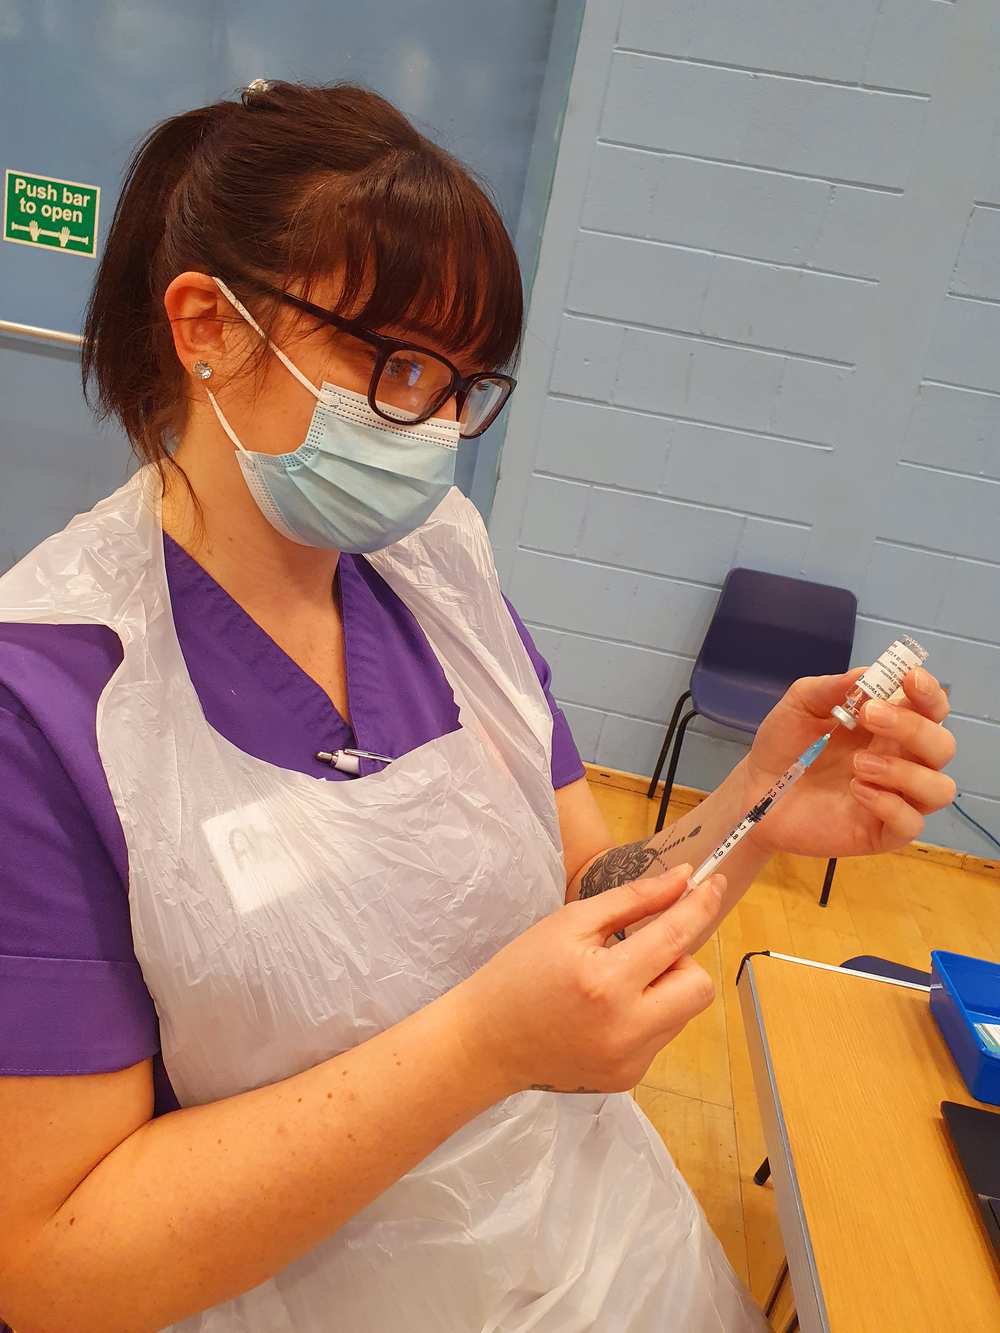 COVID19 vaccine rollout gives student nurse Abi opportunity to build